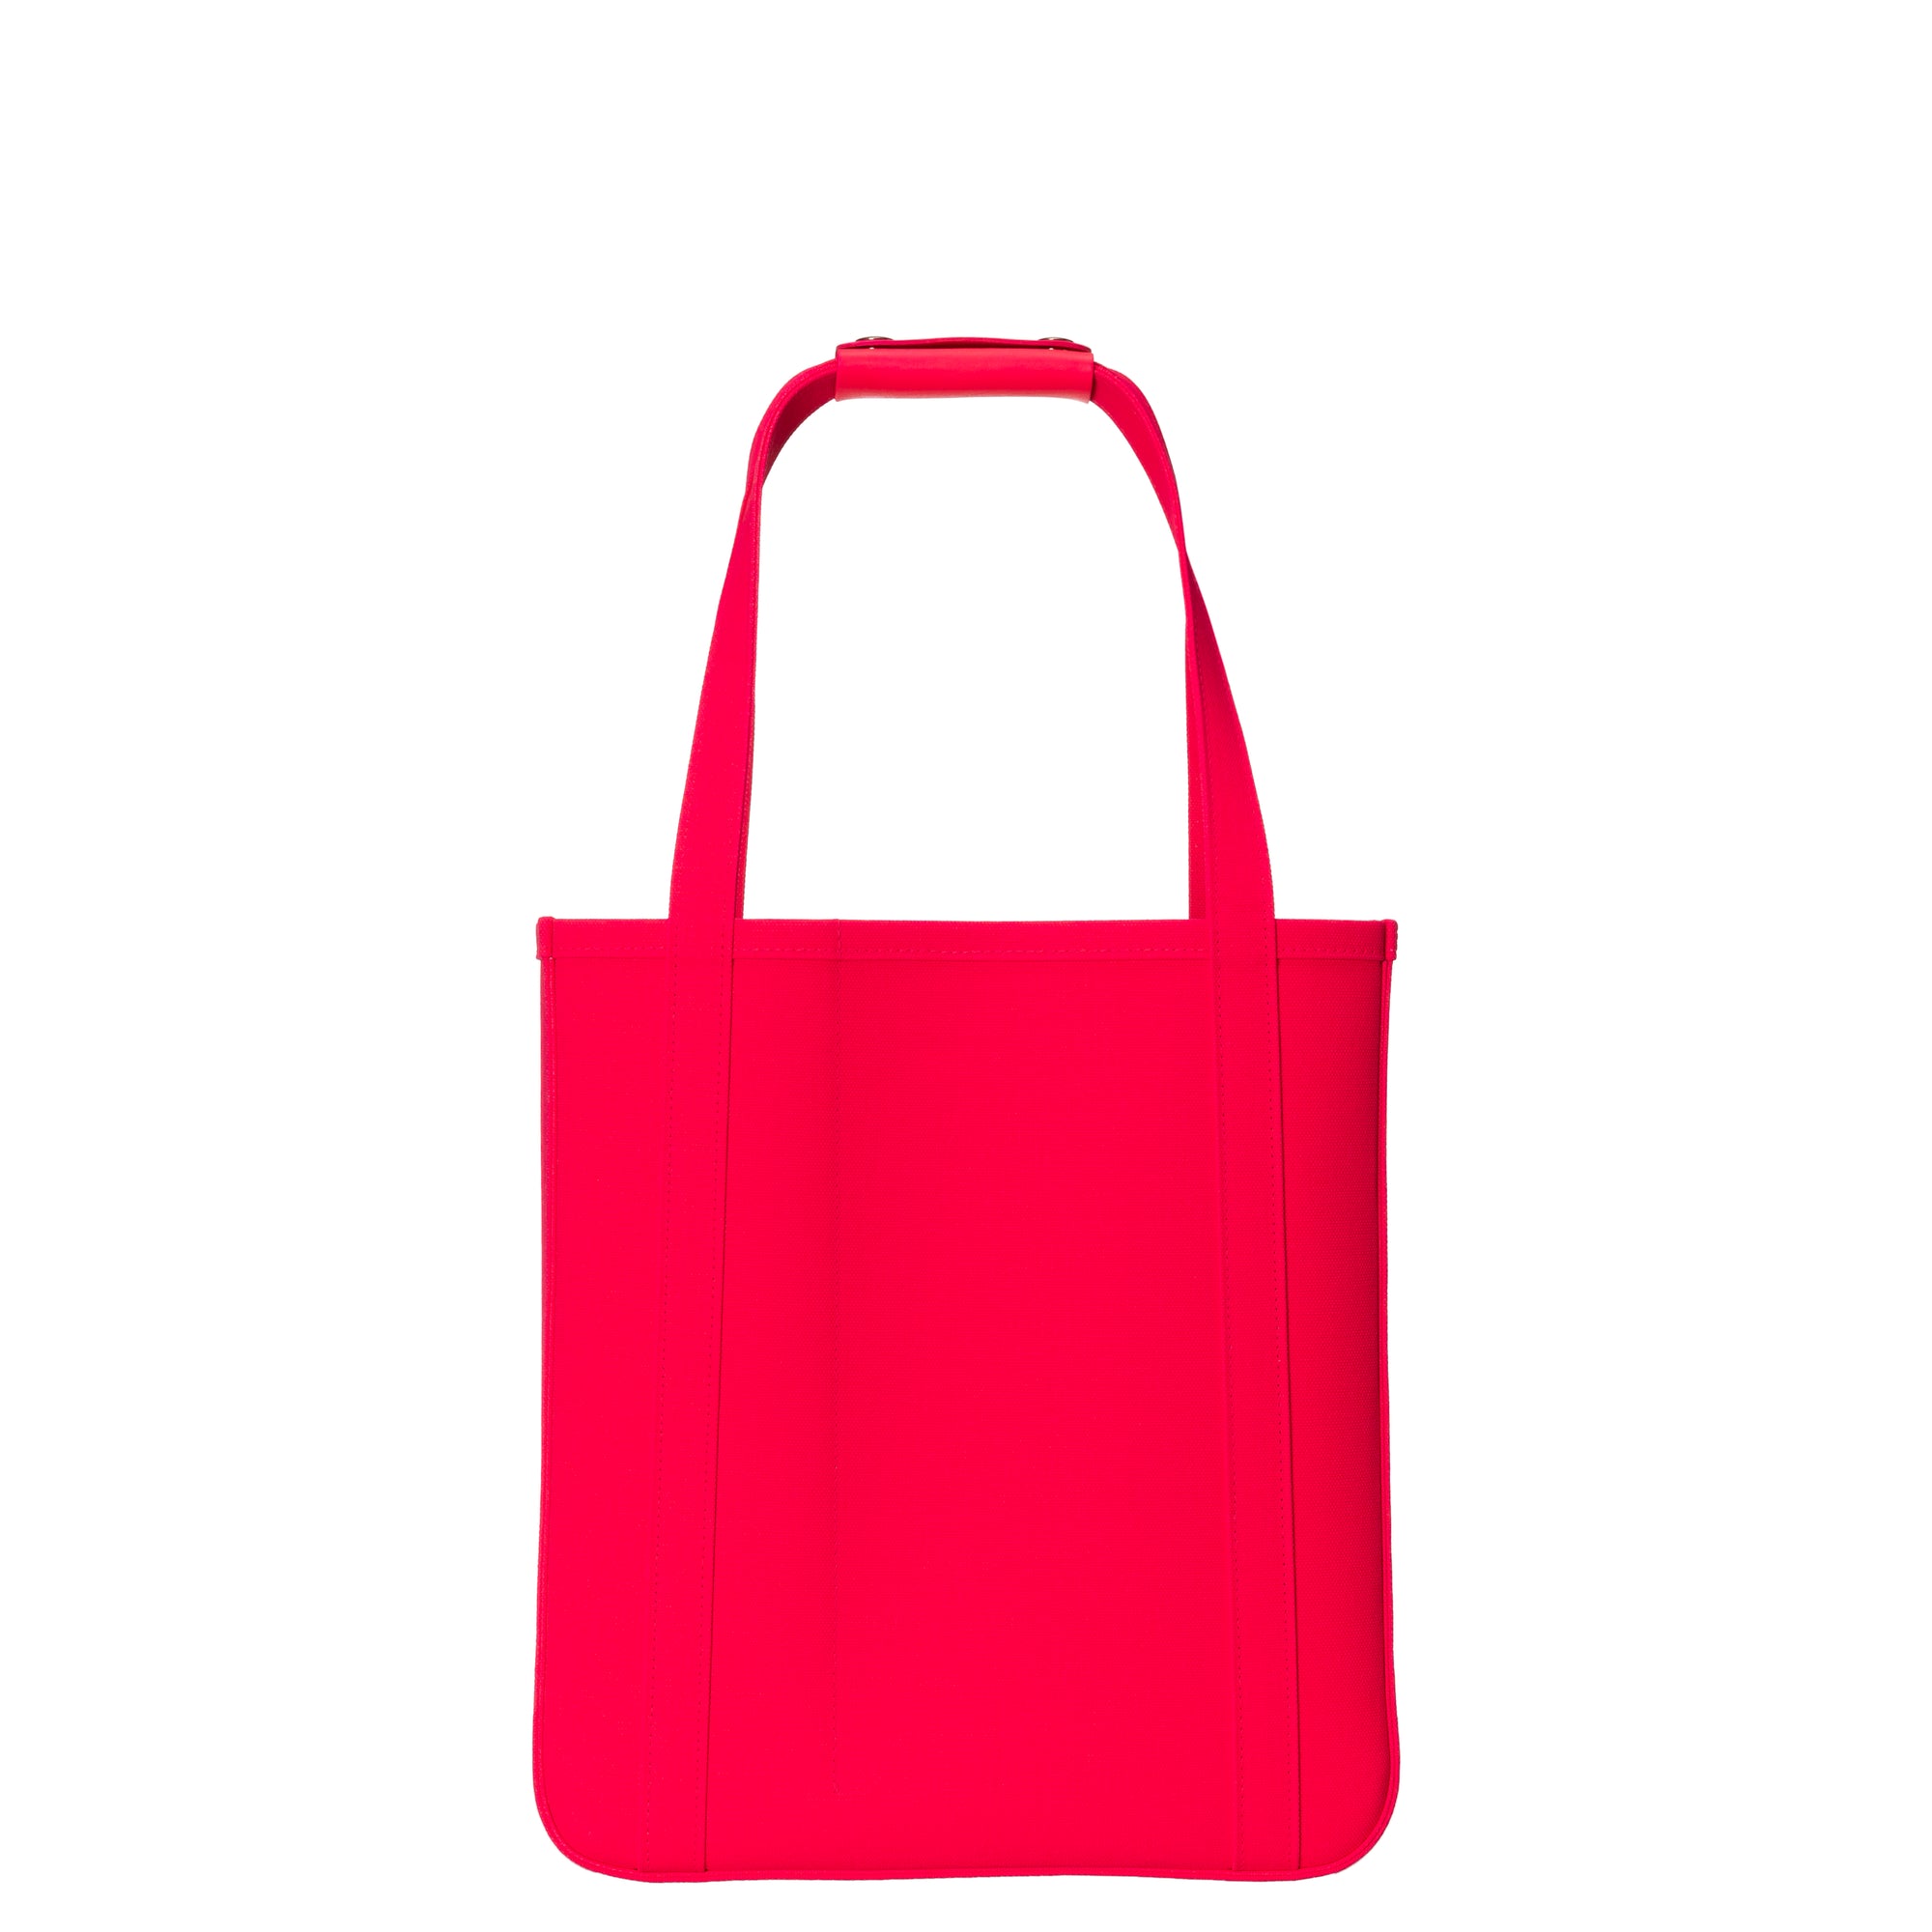 CHACOLI - 04 Tote W320 X H360 X D120 - (Neon Pink) view 1